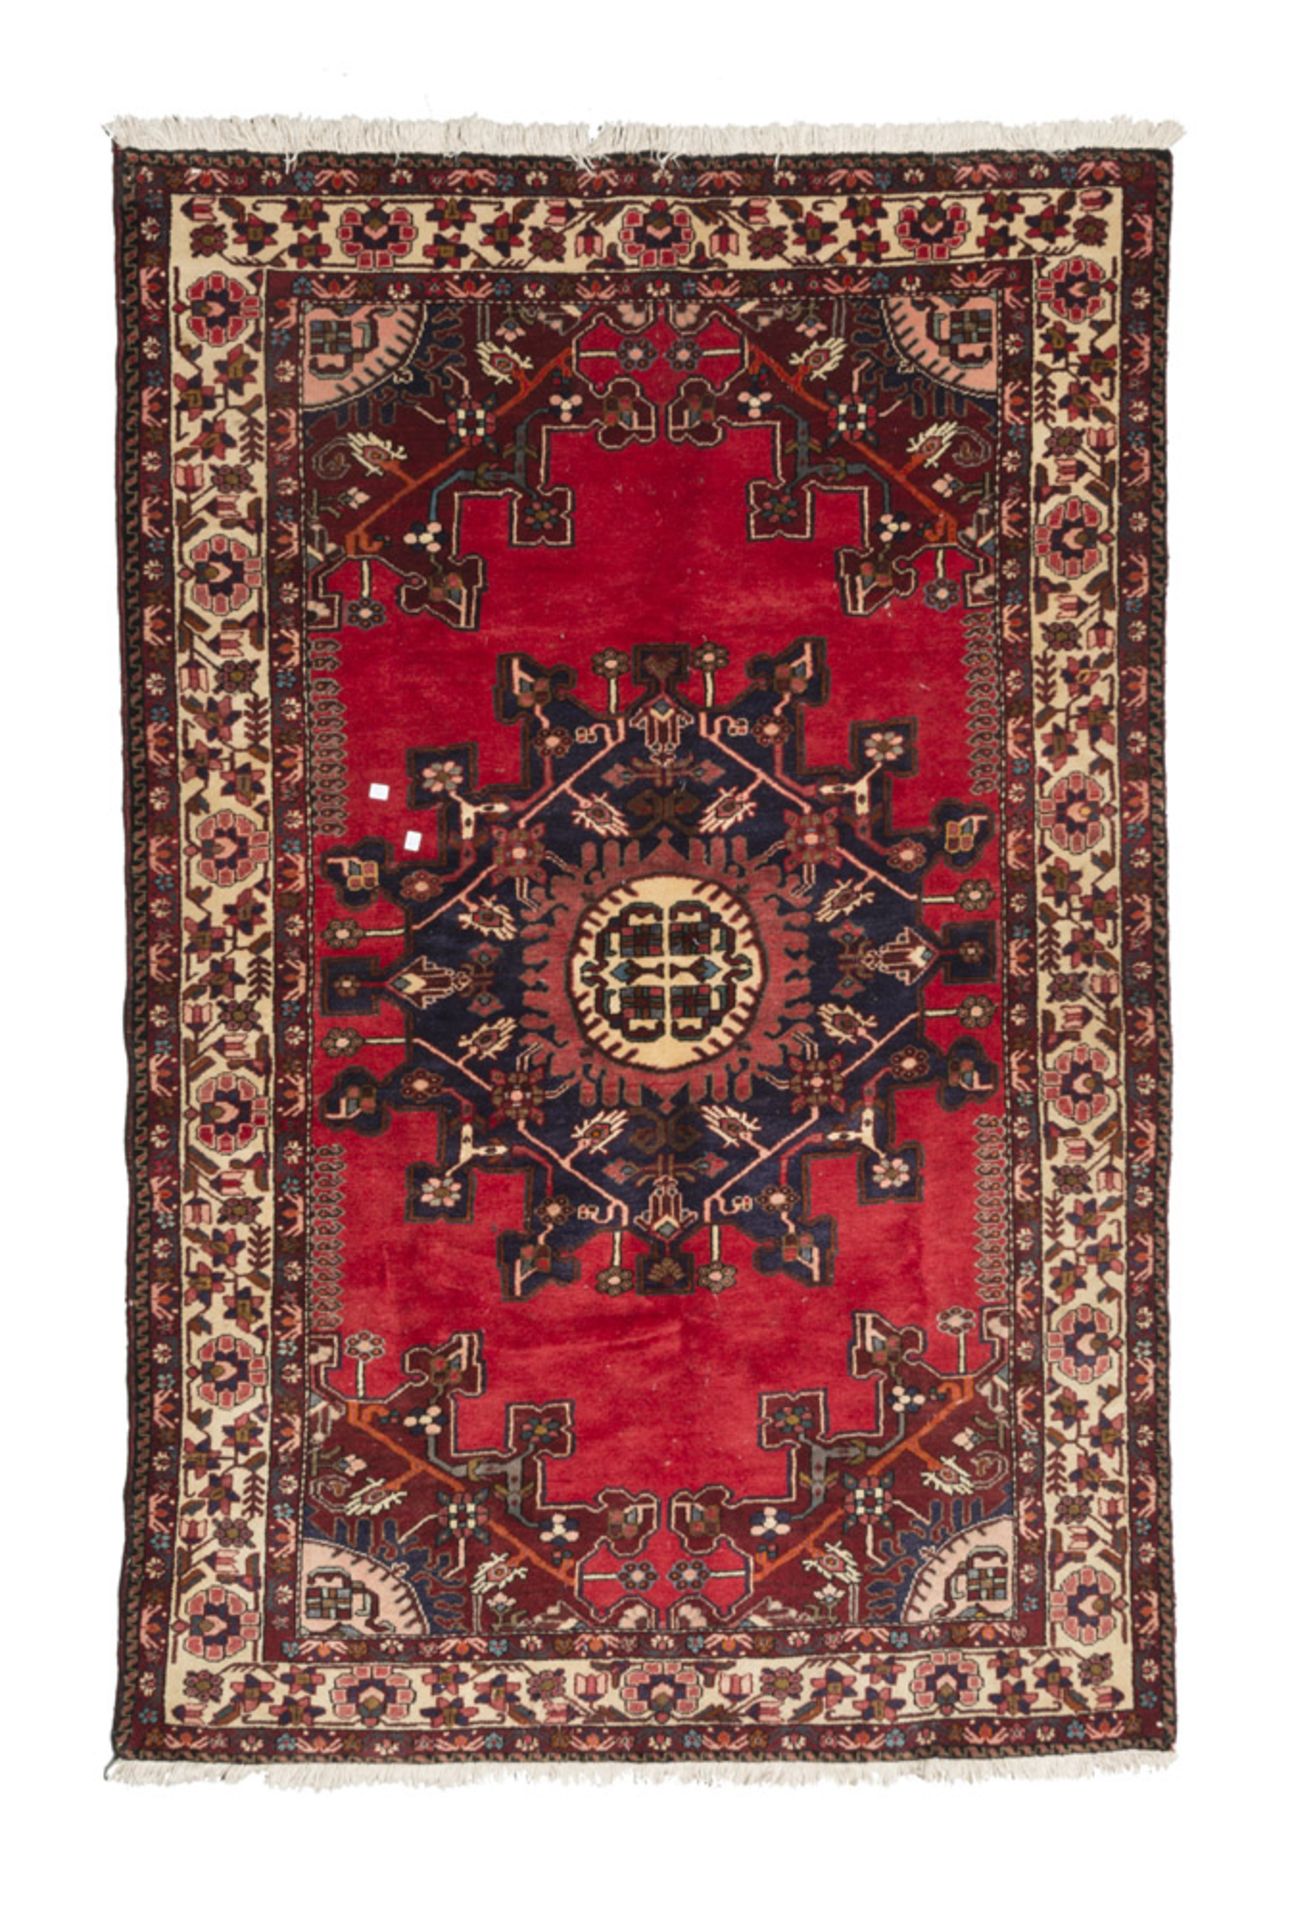 PERSIAN MESHKIN CARPET, HALF 20TH CENTURY with grnade medallion with flowers and palmette, in the